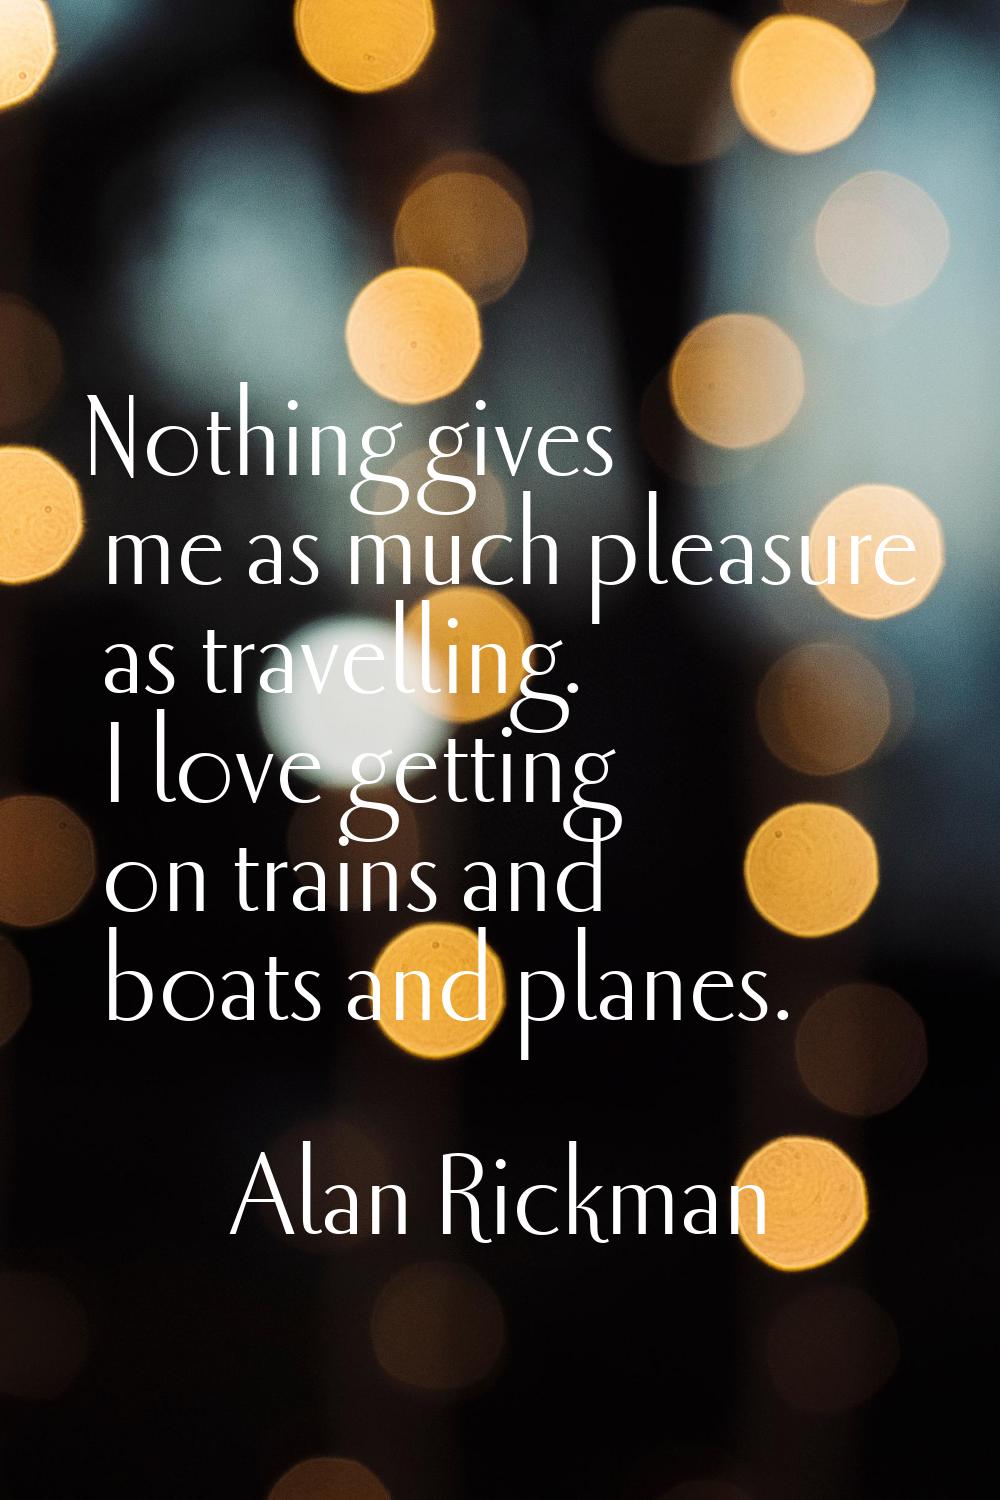 Nothing gives me as much pleasure as travelling. I love getting on trains and boats and planes.